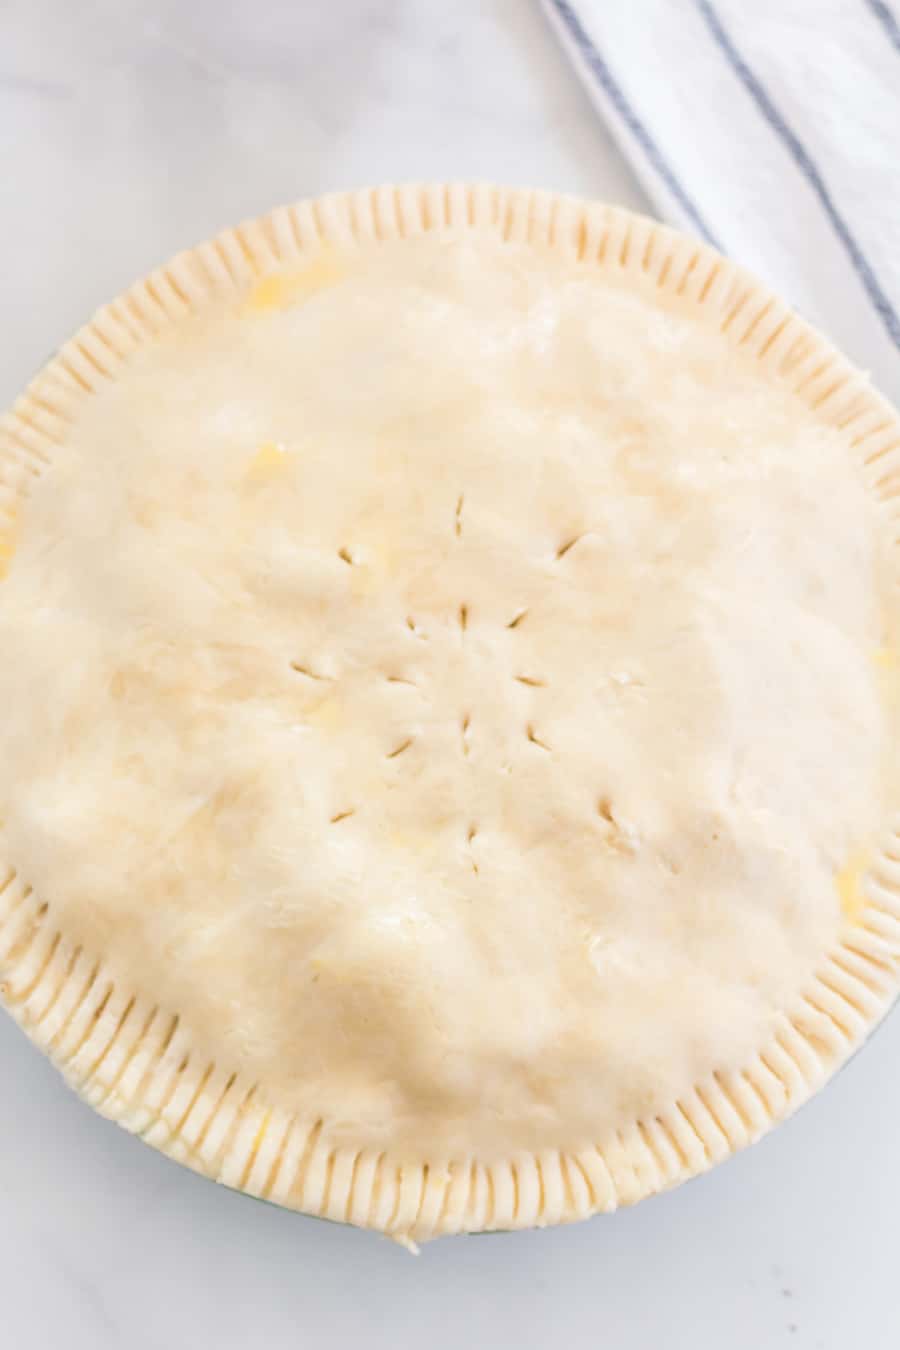 This Perfect Pie Crust (made with shortening and butter) comes together with just a few ingredients, one of which may just surprise you: vinegar.